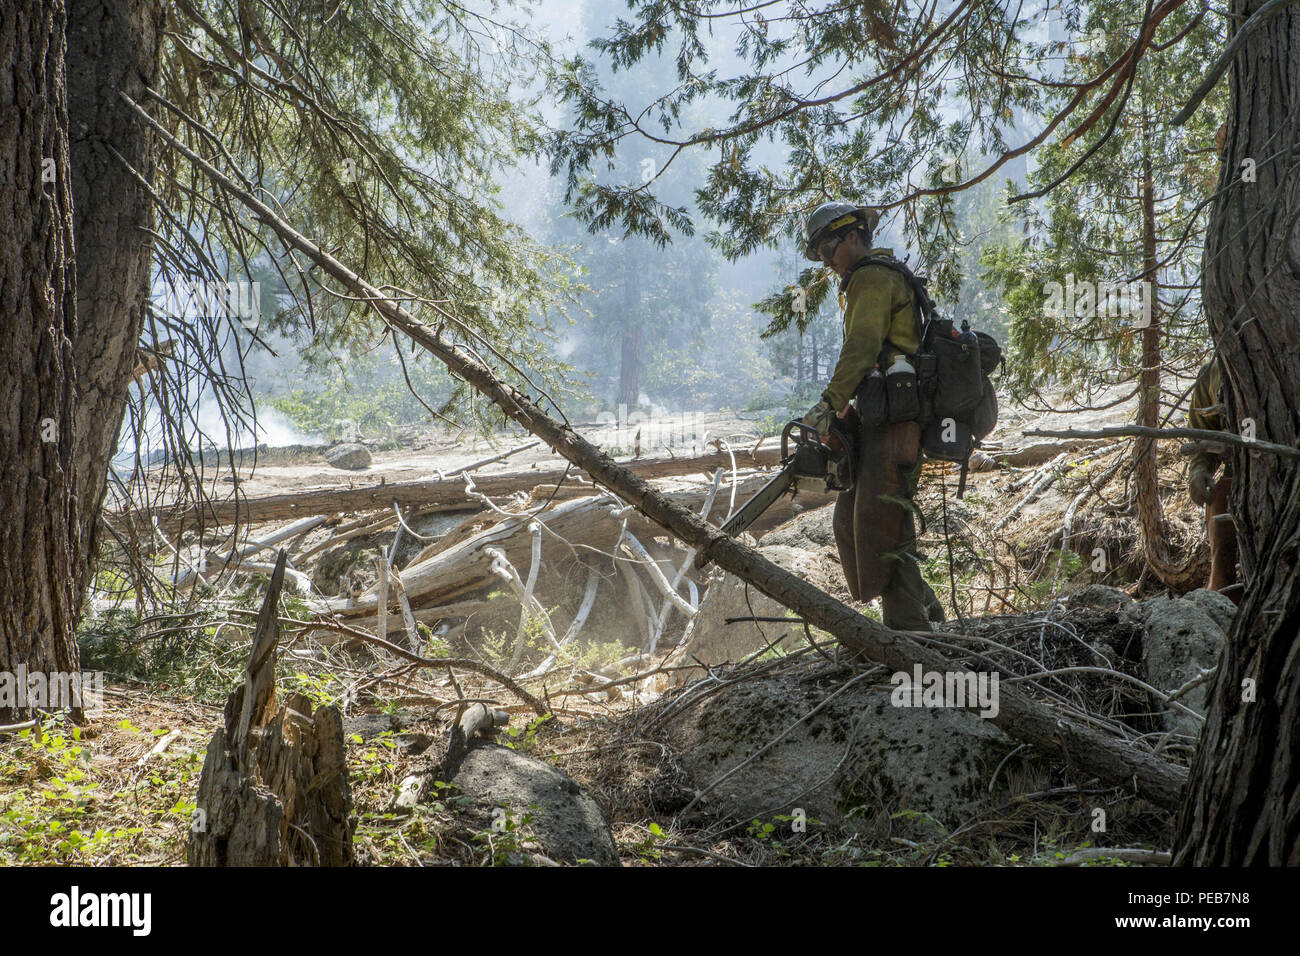 Dardnelle, California, U.S.A. 13th Aug, 2018. A Palomar HotShots Sawyer clears branches as they work to create a fire break near Kennedy Meadows. The Donnell Fire in Tuolumne County continues to grown and has reached 28,302 acres according to the U.S. Forest Service as of Monday Aug. 13, 2018. As of Monday morning 54 structures have been destroyed and 220 are stilled threatened. Credit: Marty Bicek/ZUMA Wire/Alamy Live News Stock Photo